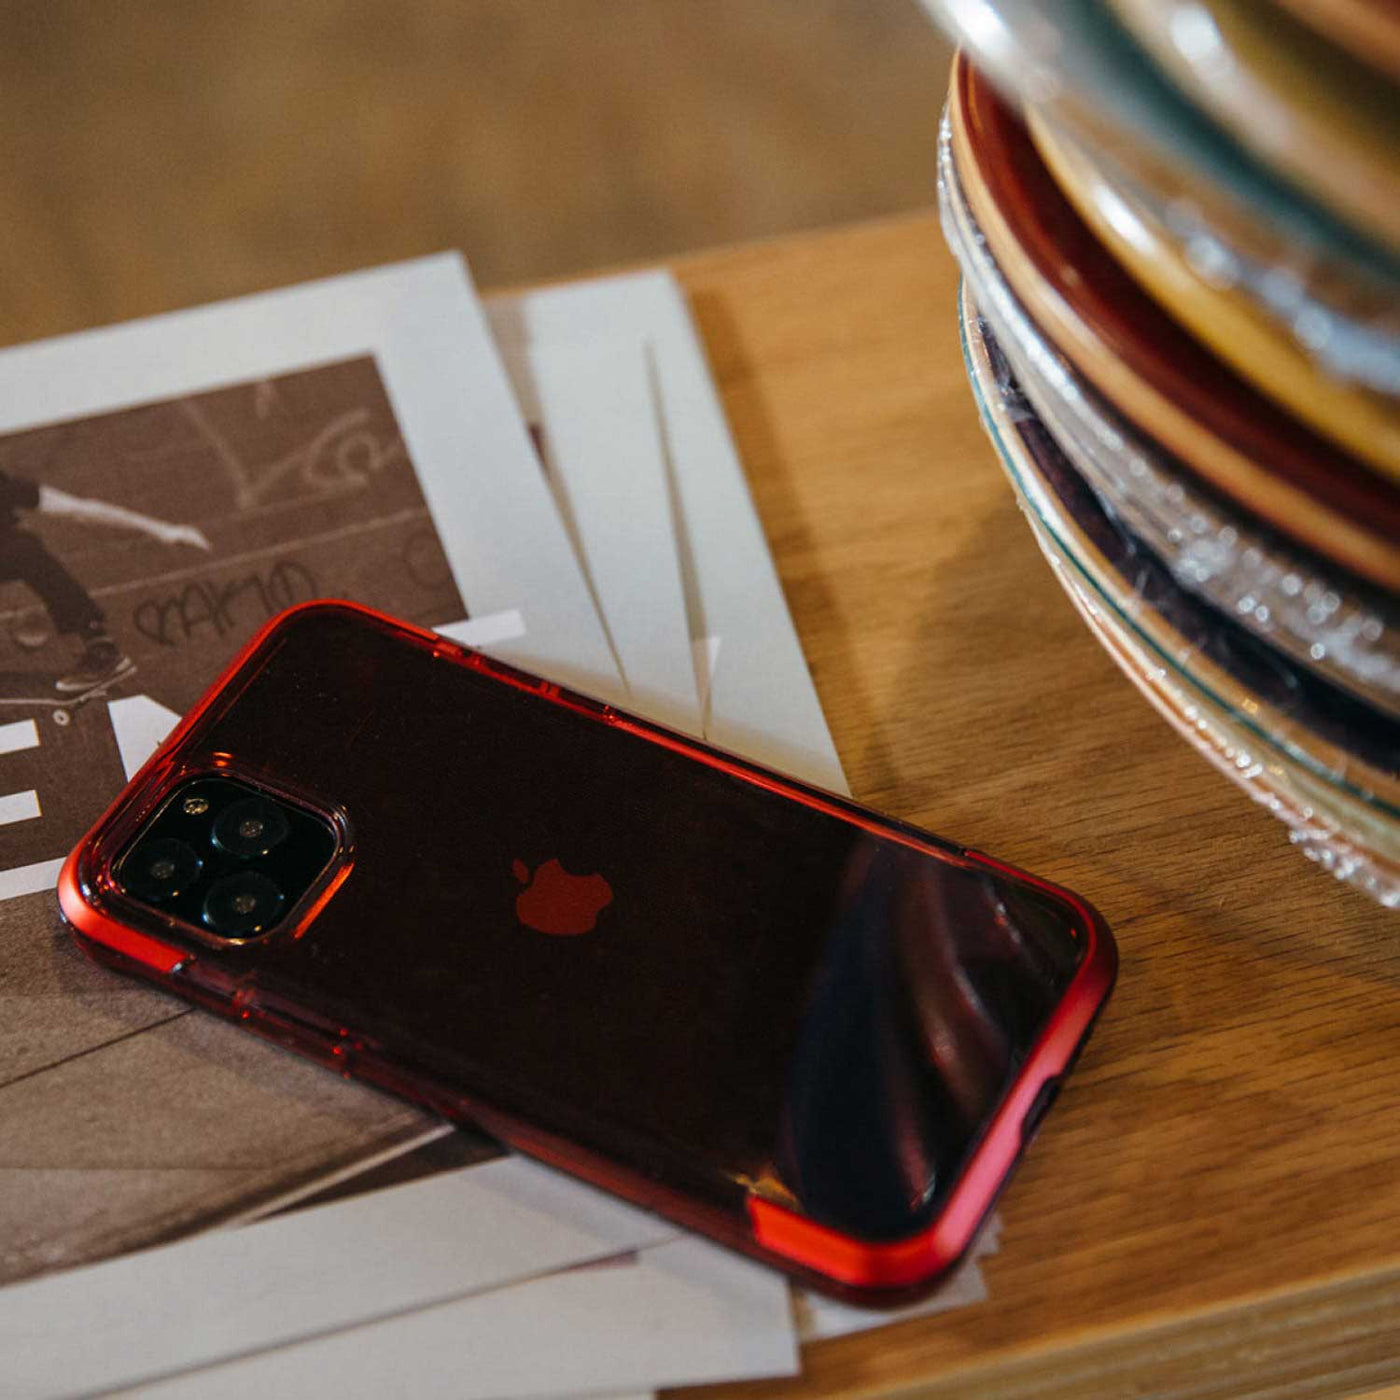 Transparent Case for iPhone 11 Pro Max. Raptic Air in red.#color_red